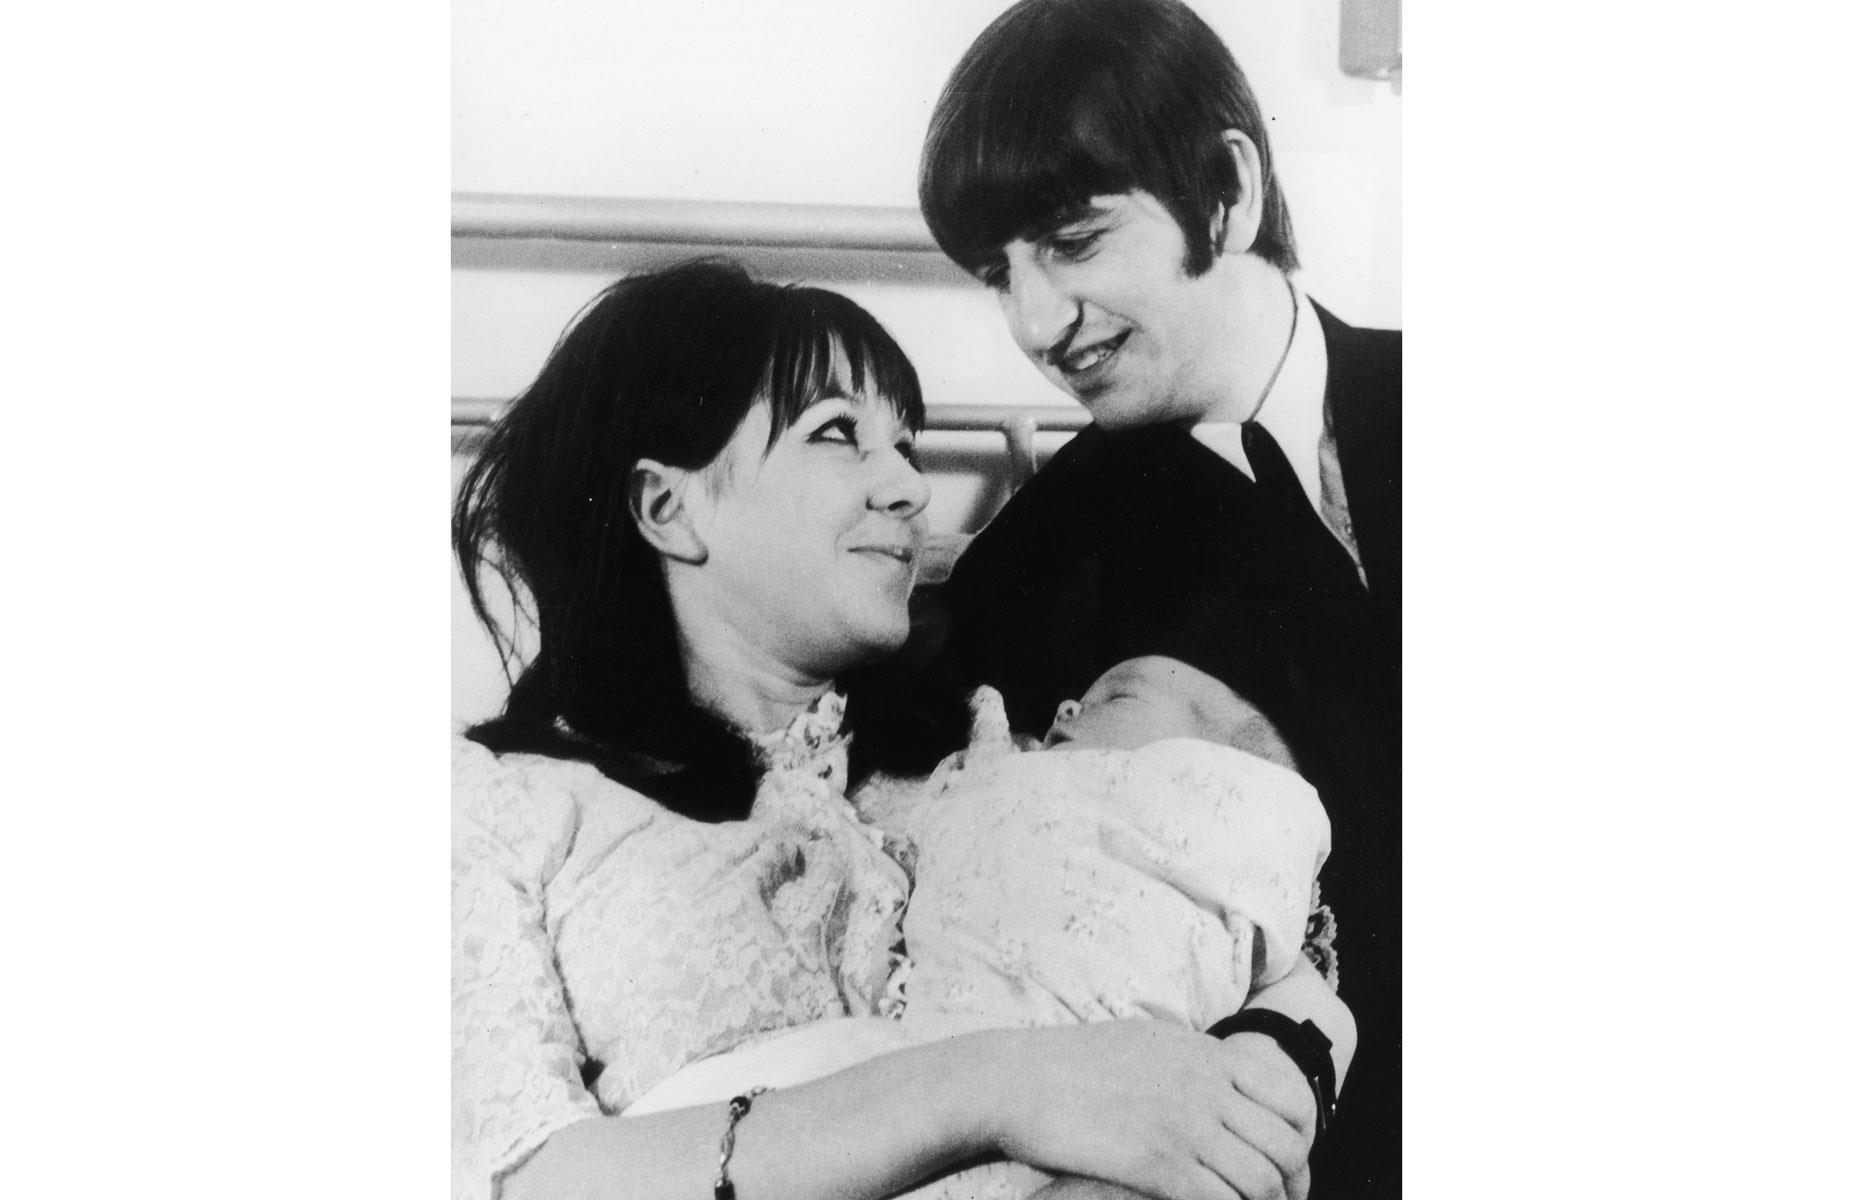 <p>The first of Ringo Starr's three kids with Maureen Cox, Zak Starkey arrived in the world in 1965. At the age of eight, he was gifted a drum kit by his godfather Keith Moon, and he hasn't looked back since.</p>  <p>Now one of the world's most celebrated drummers – some say he easily outshines his father in terms of talent – Zak ended up joining The Who in 1996 and remains the band's touring drummer.</p>